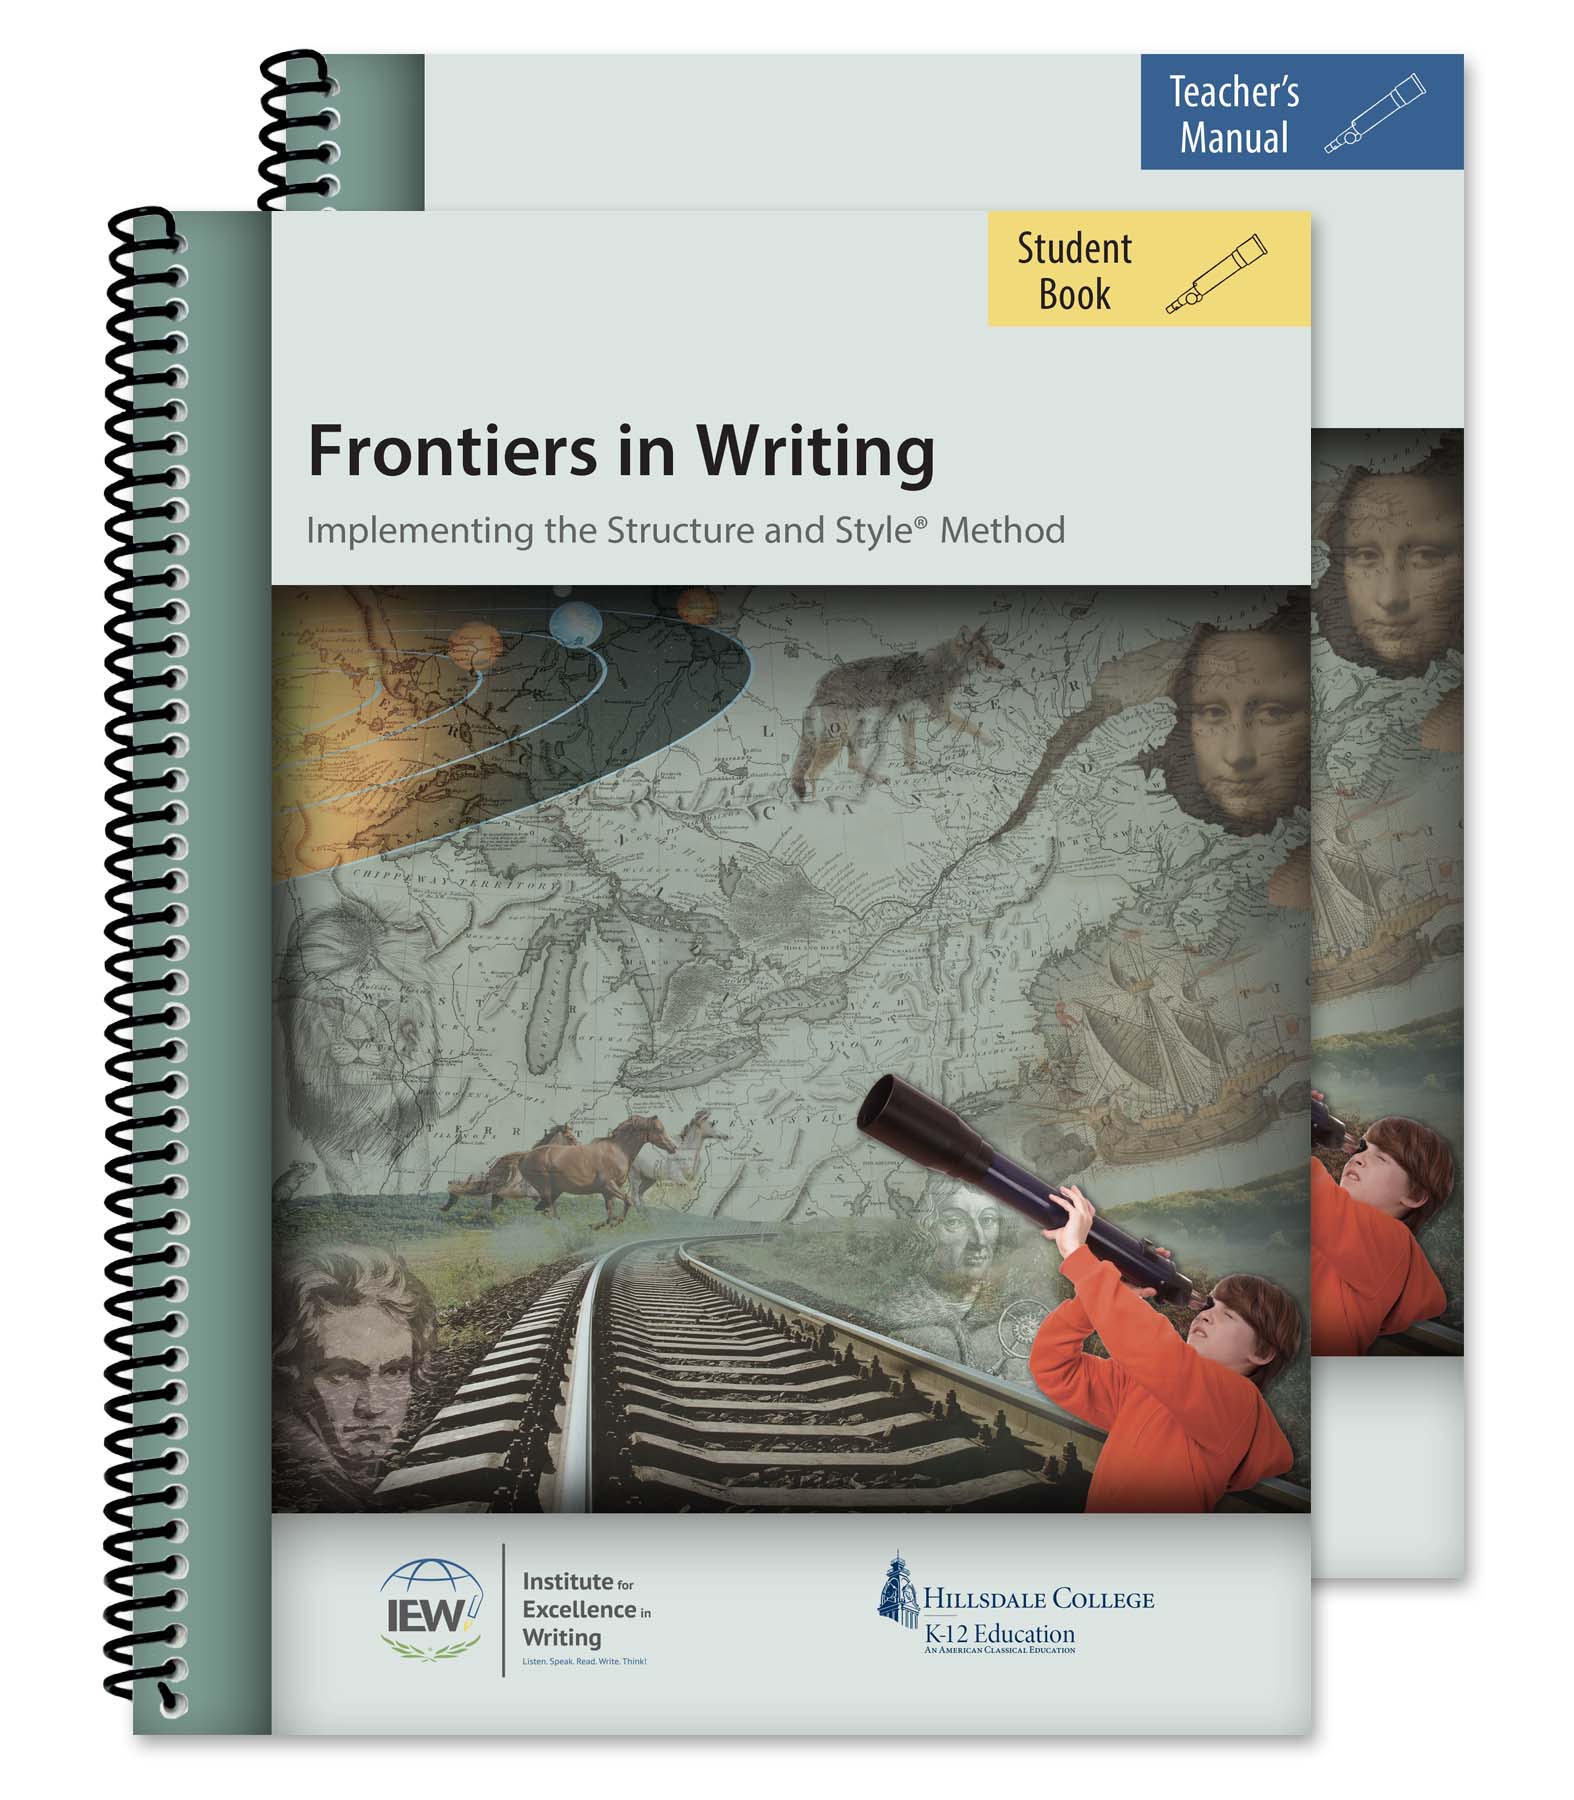 Frontiers in Writing [Teacher/Student Combo]